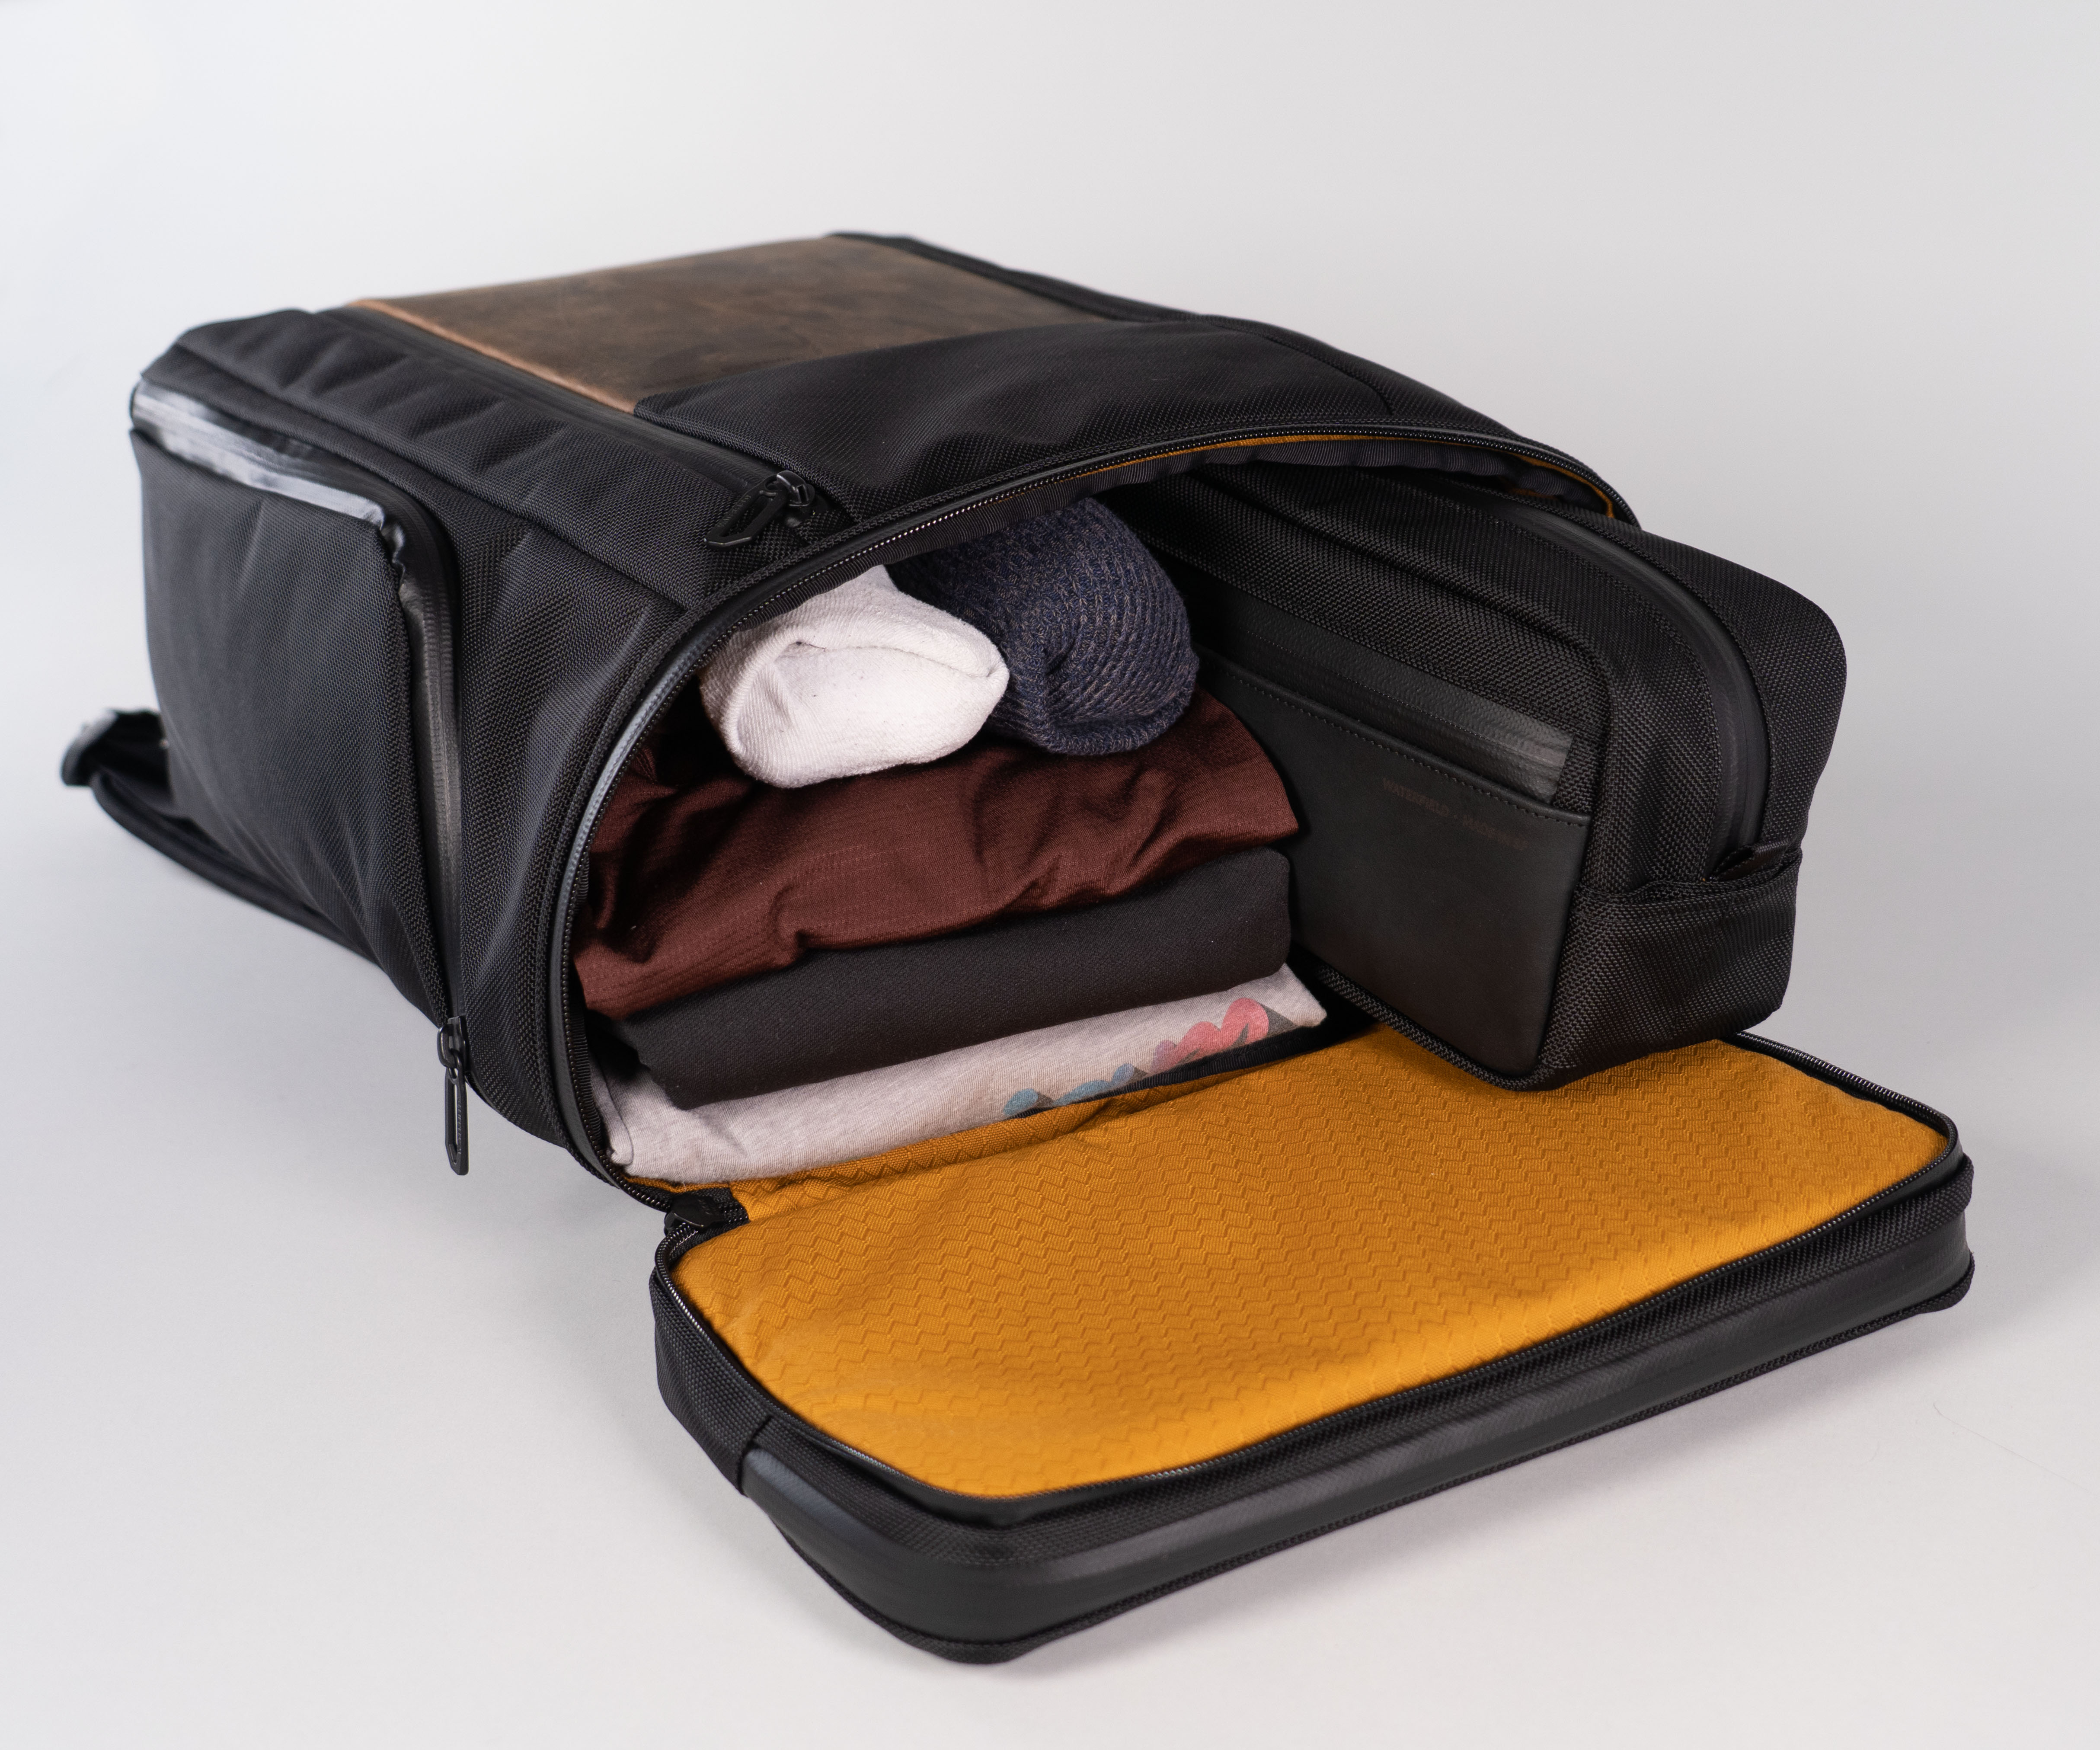 Main compartment fits a Travel Toiletry Bag, clothing, electronics